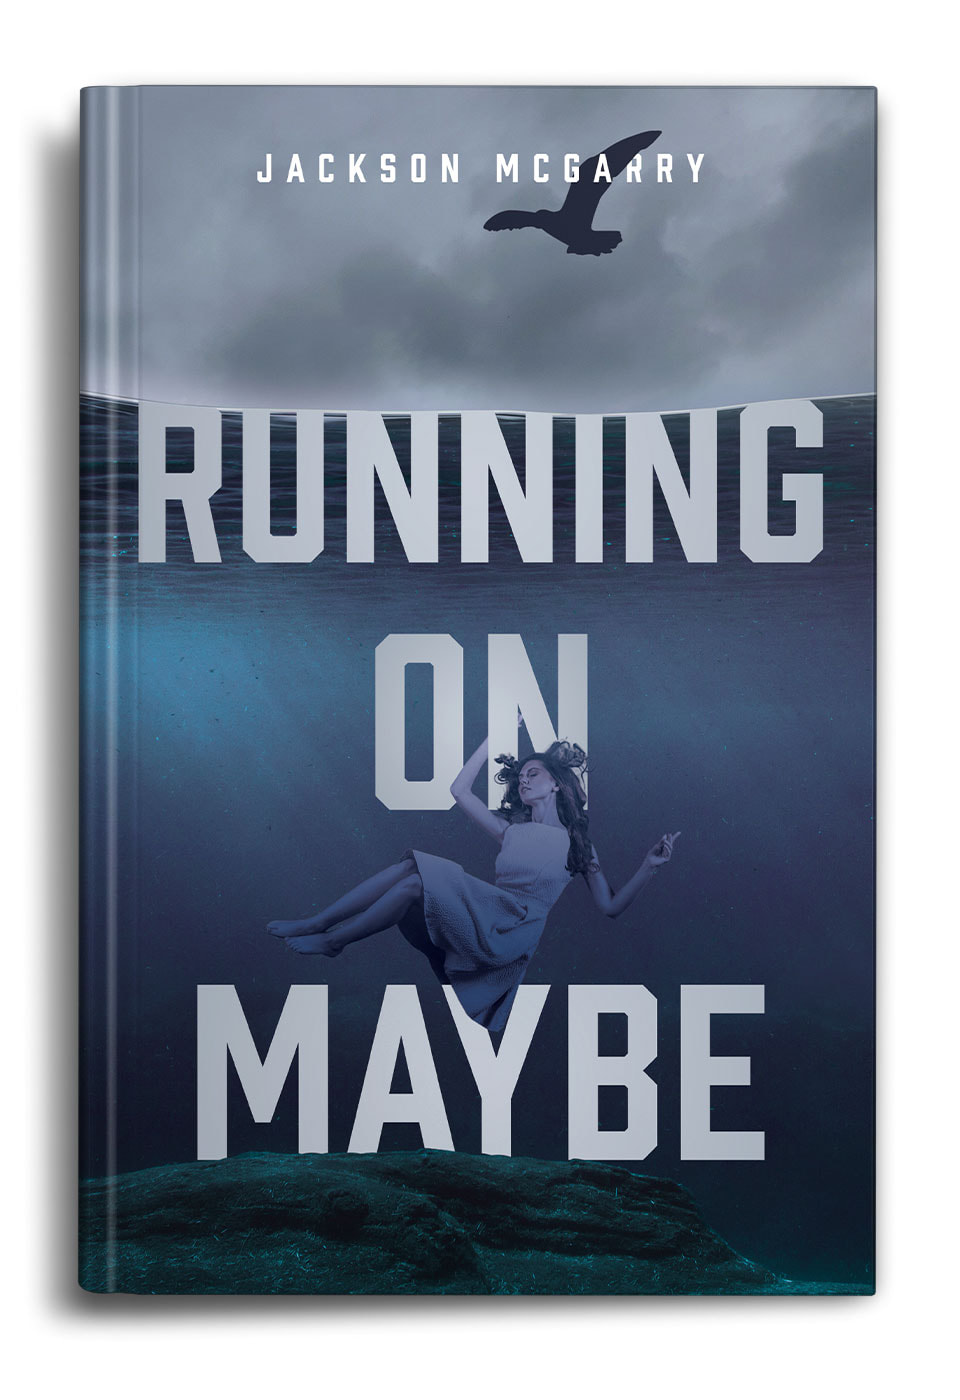 Running on Maybe by Jackson McGarry